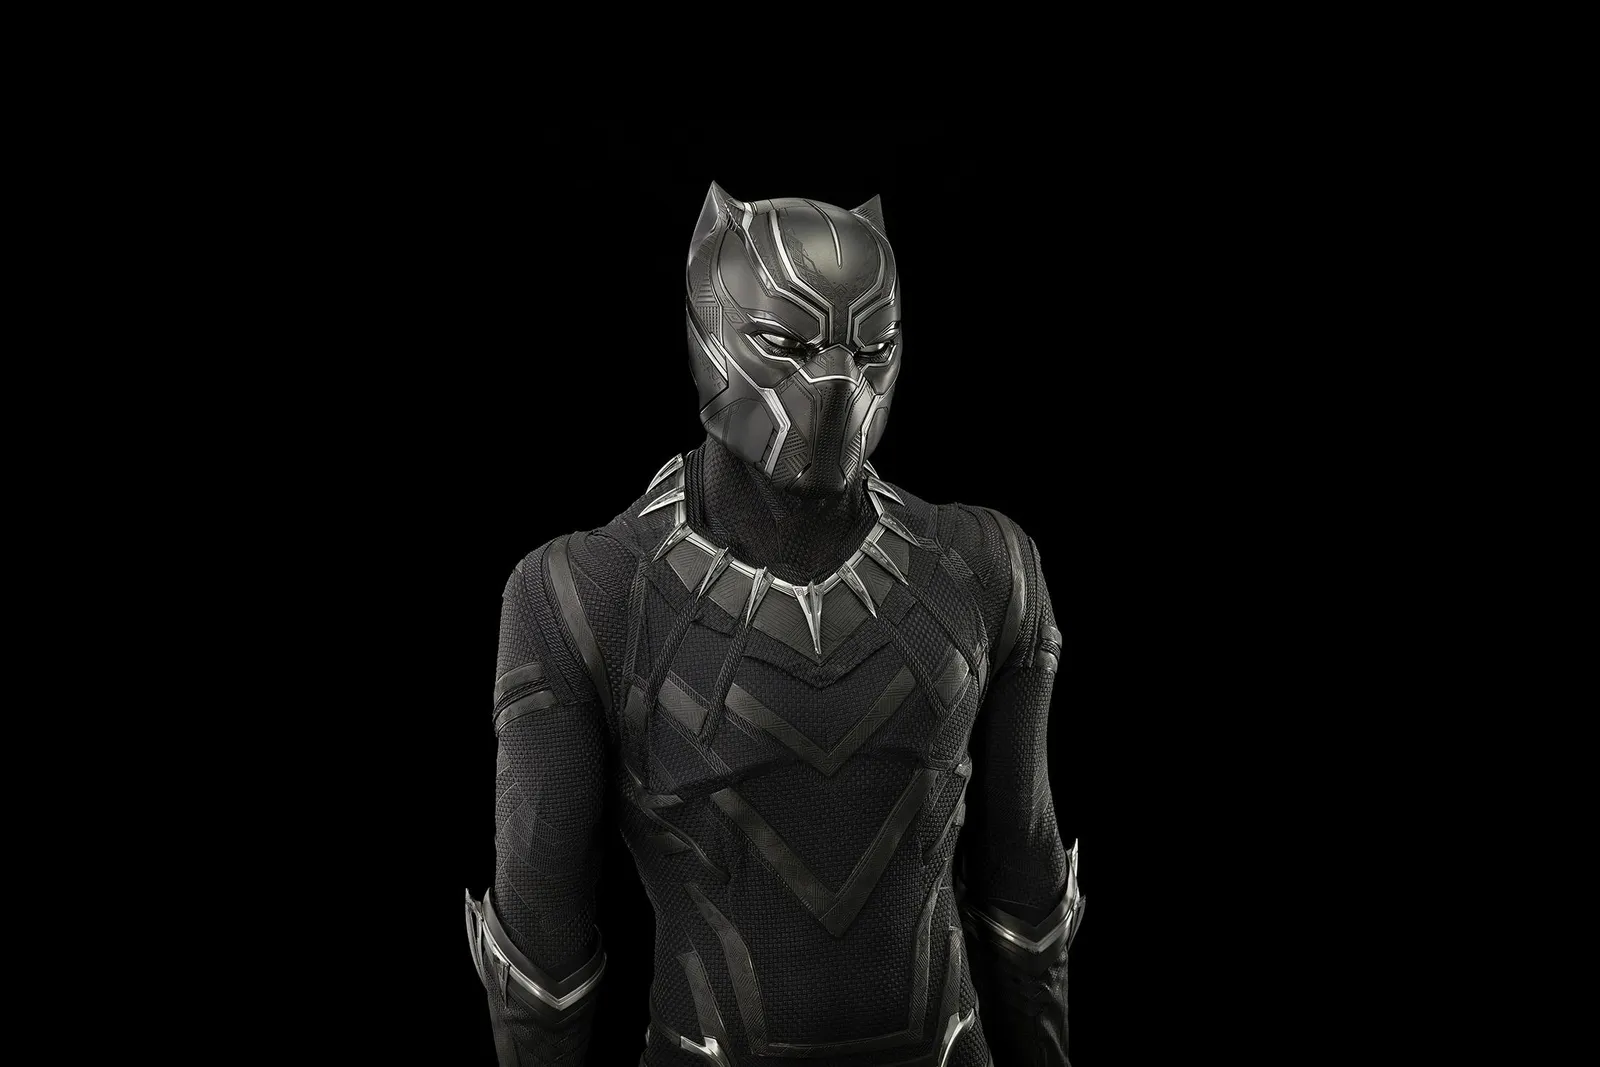 Five reasons why you should watch Black Panther